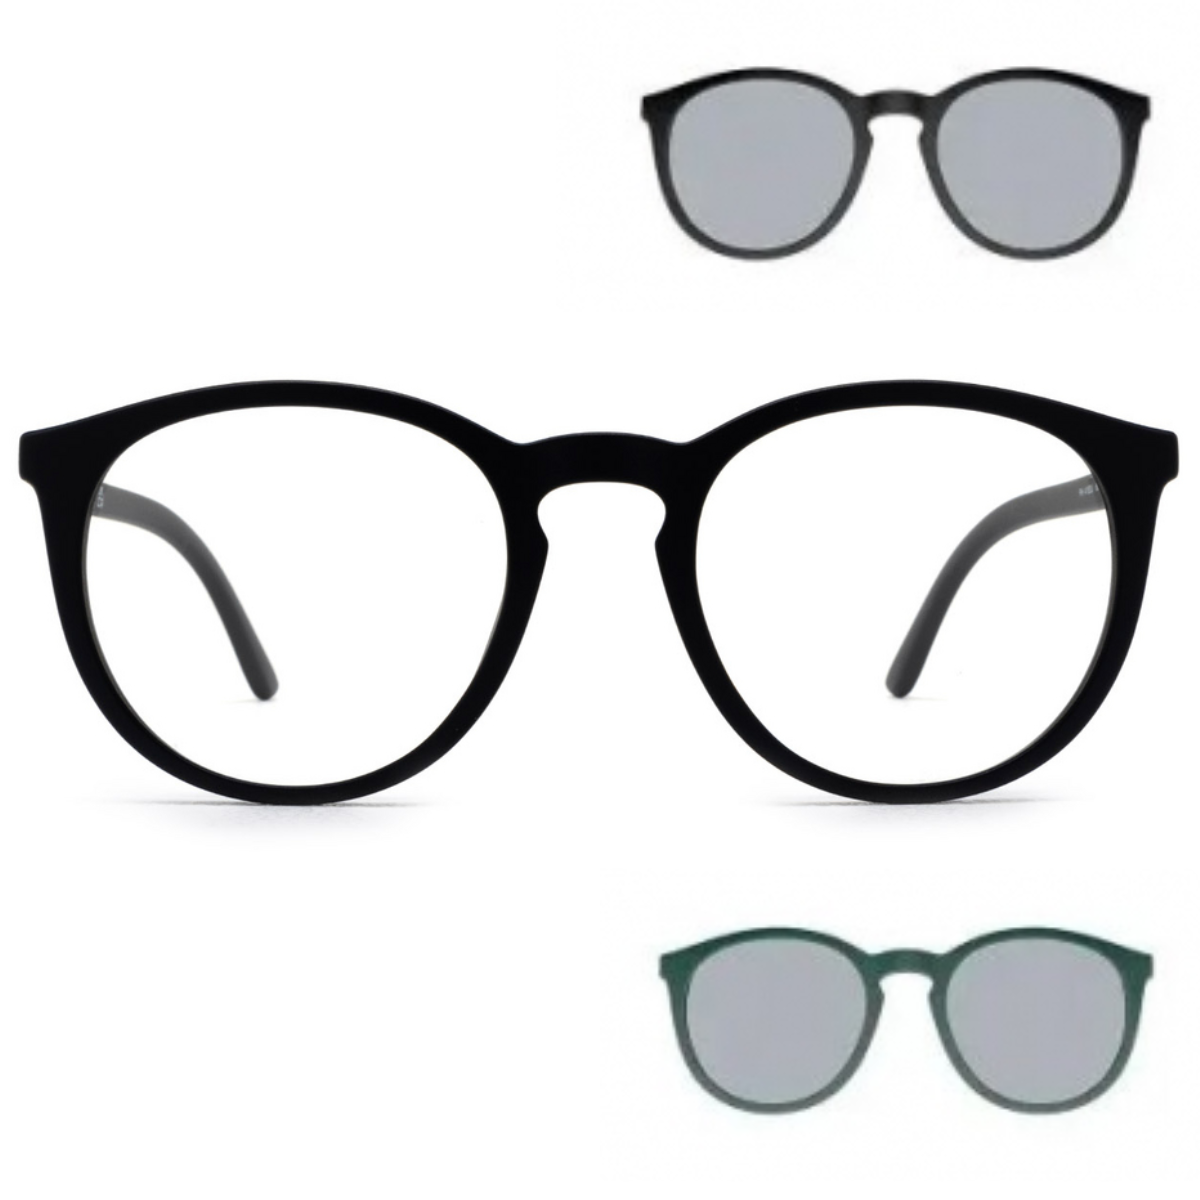 "Shop the Latest Ralph Lauren Polo 4183U Round Shape Sunglasses for Men at Optorium. Stylish circle shape with non-polarized lenses in blur and mirror grey. Green and black acetate frame. Upgrade your eye game with these top sunglasses for men. optorium"